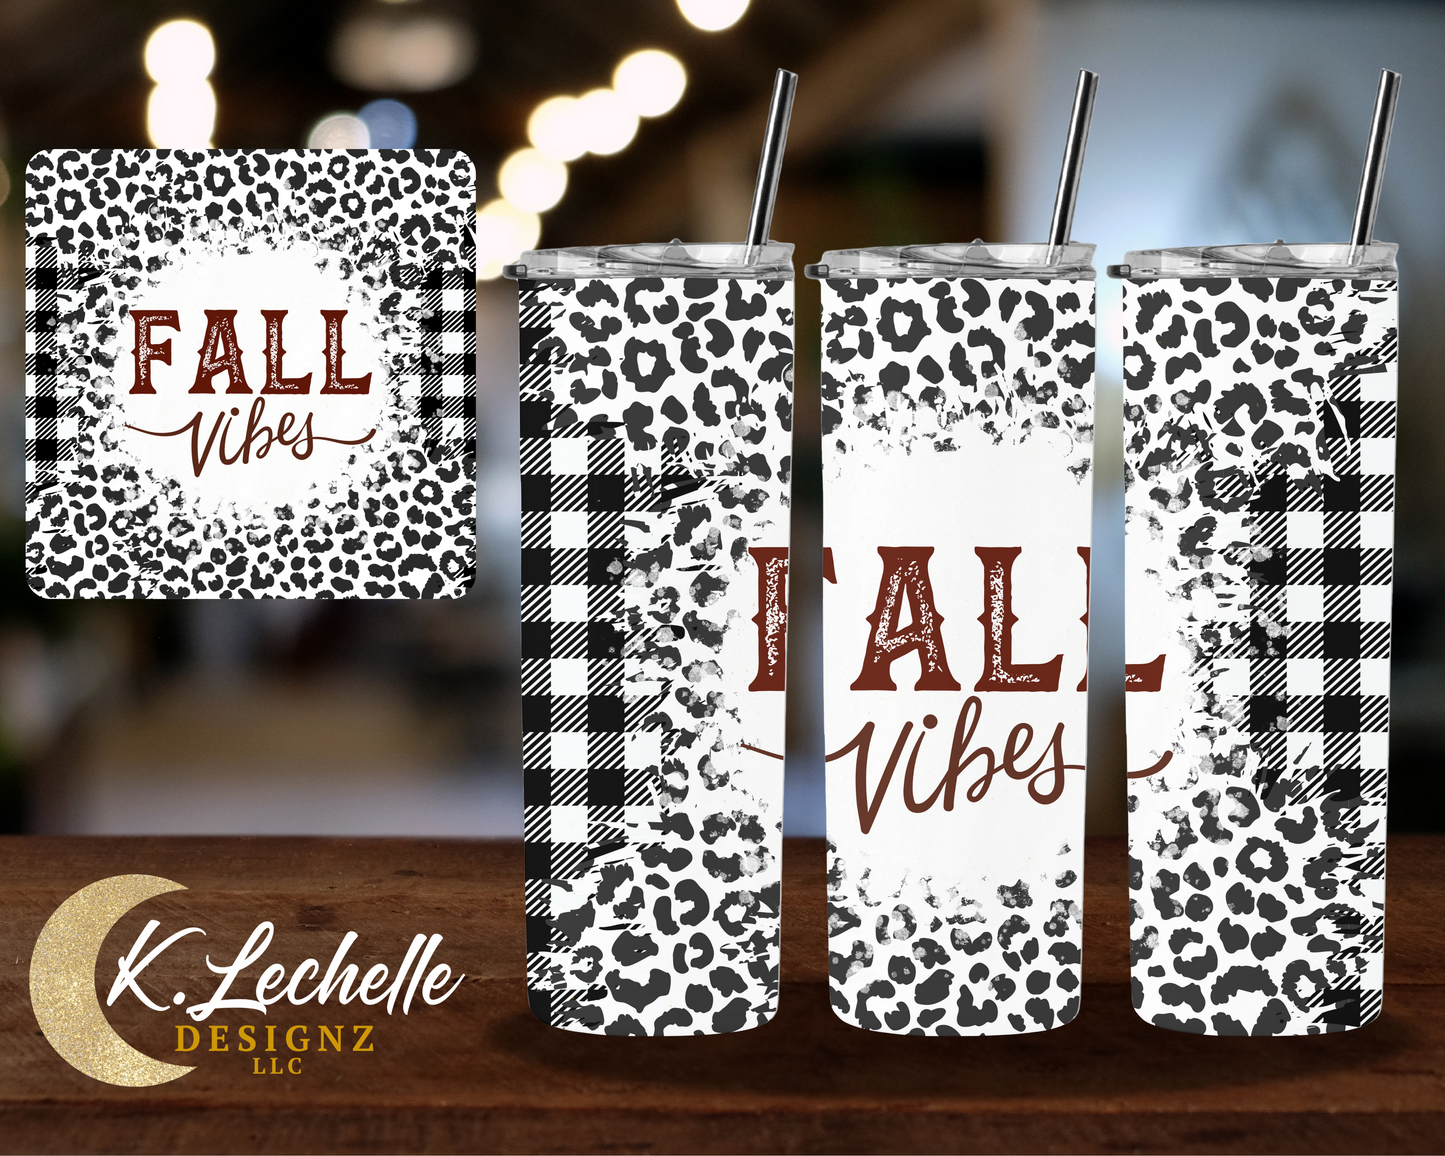 Fall Vibes Stainless Steel Tumbler